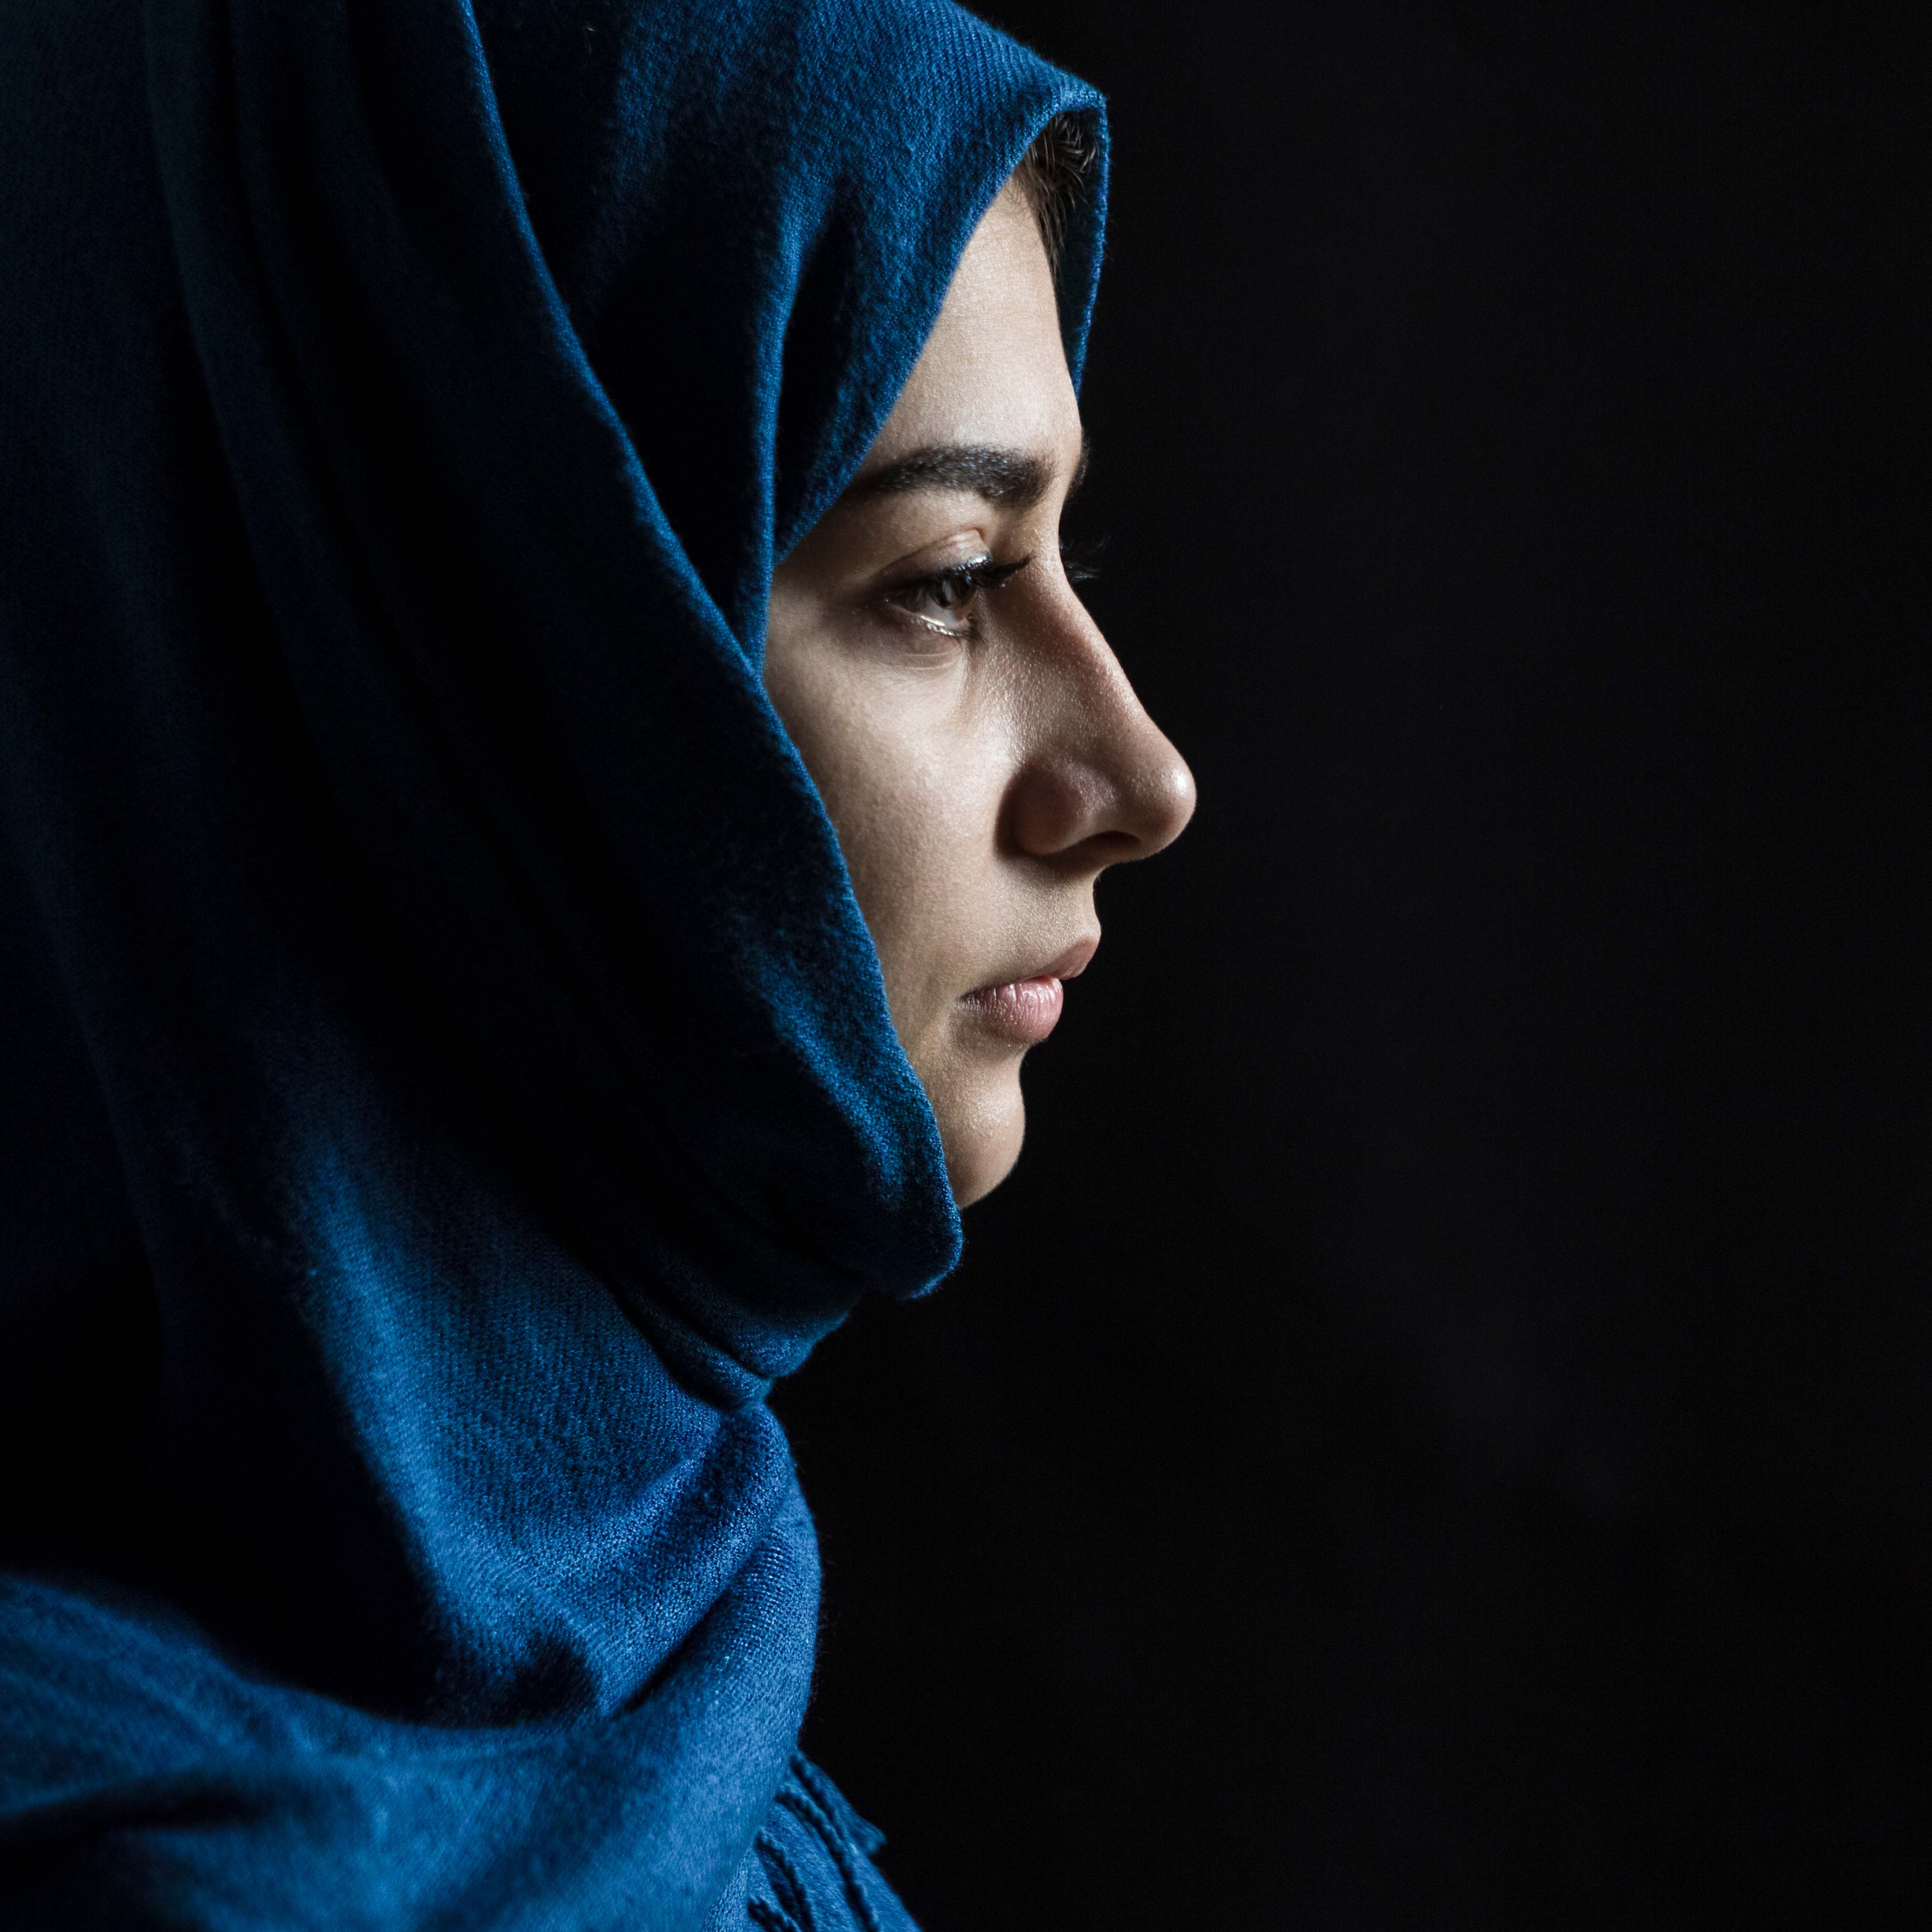 Can I, as a white person, veil using a hijab? My religion says